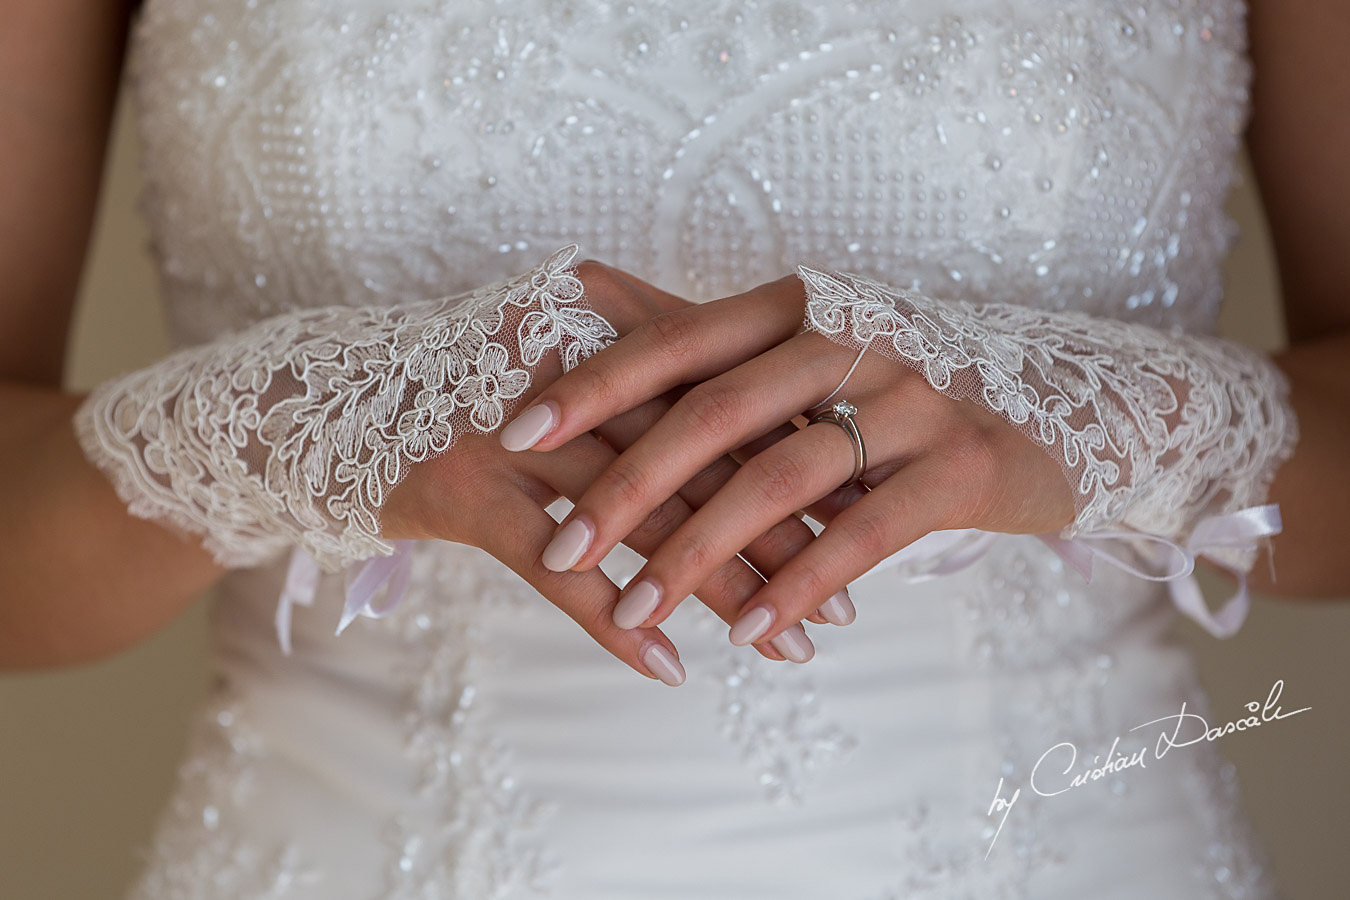 Bridal details photographed at Elias Beach Hotel in Limassol, Cyprus by photographer Cristian Dascalu